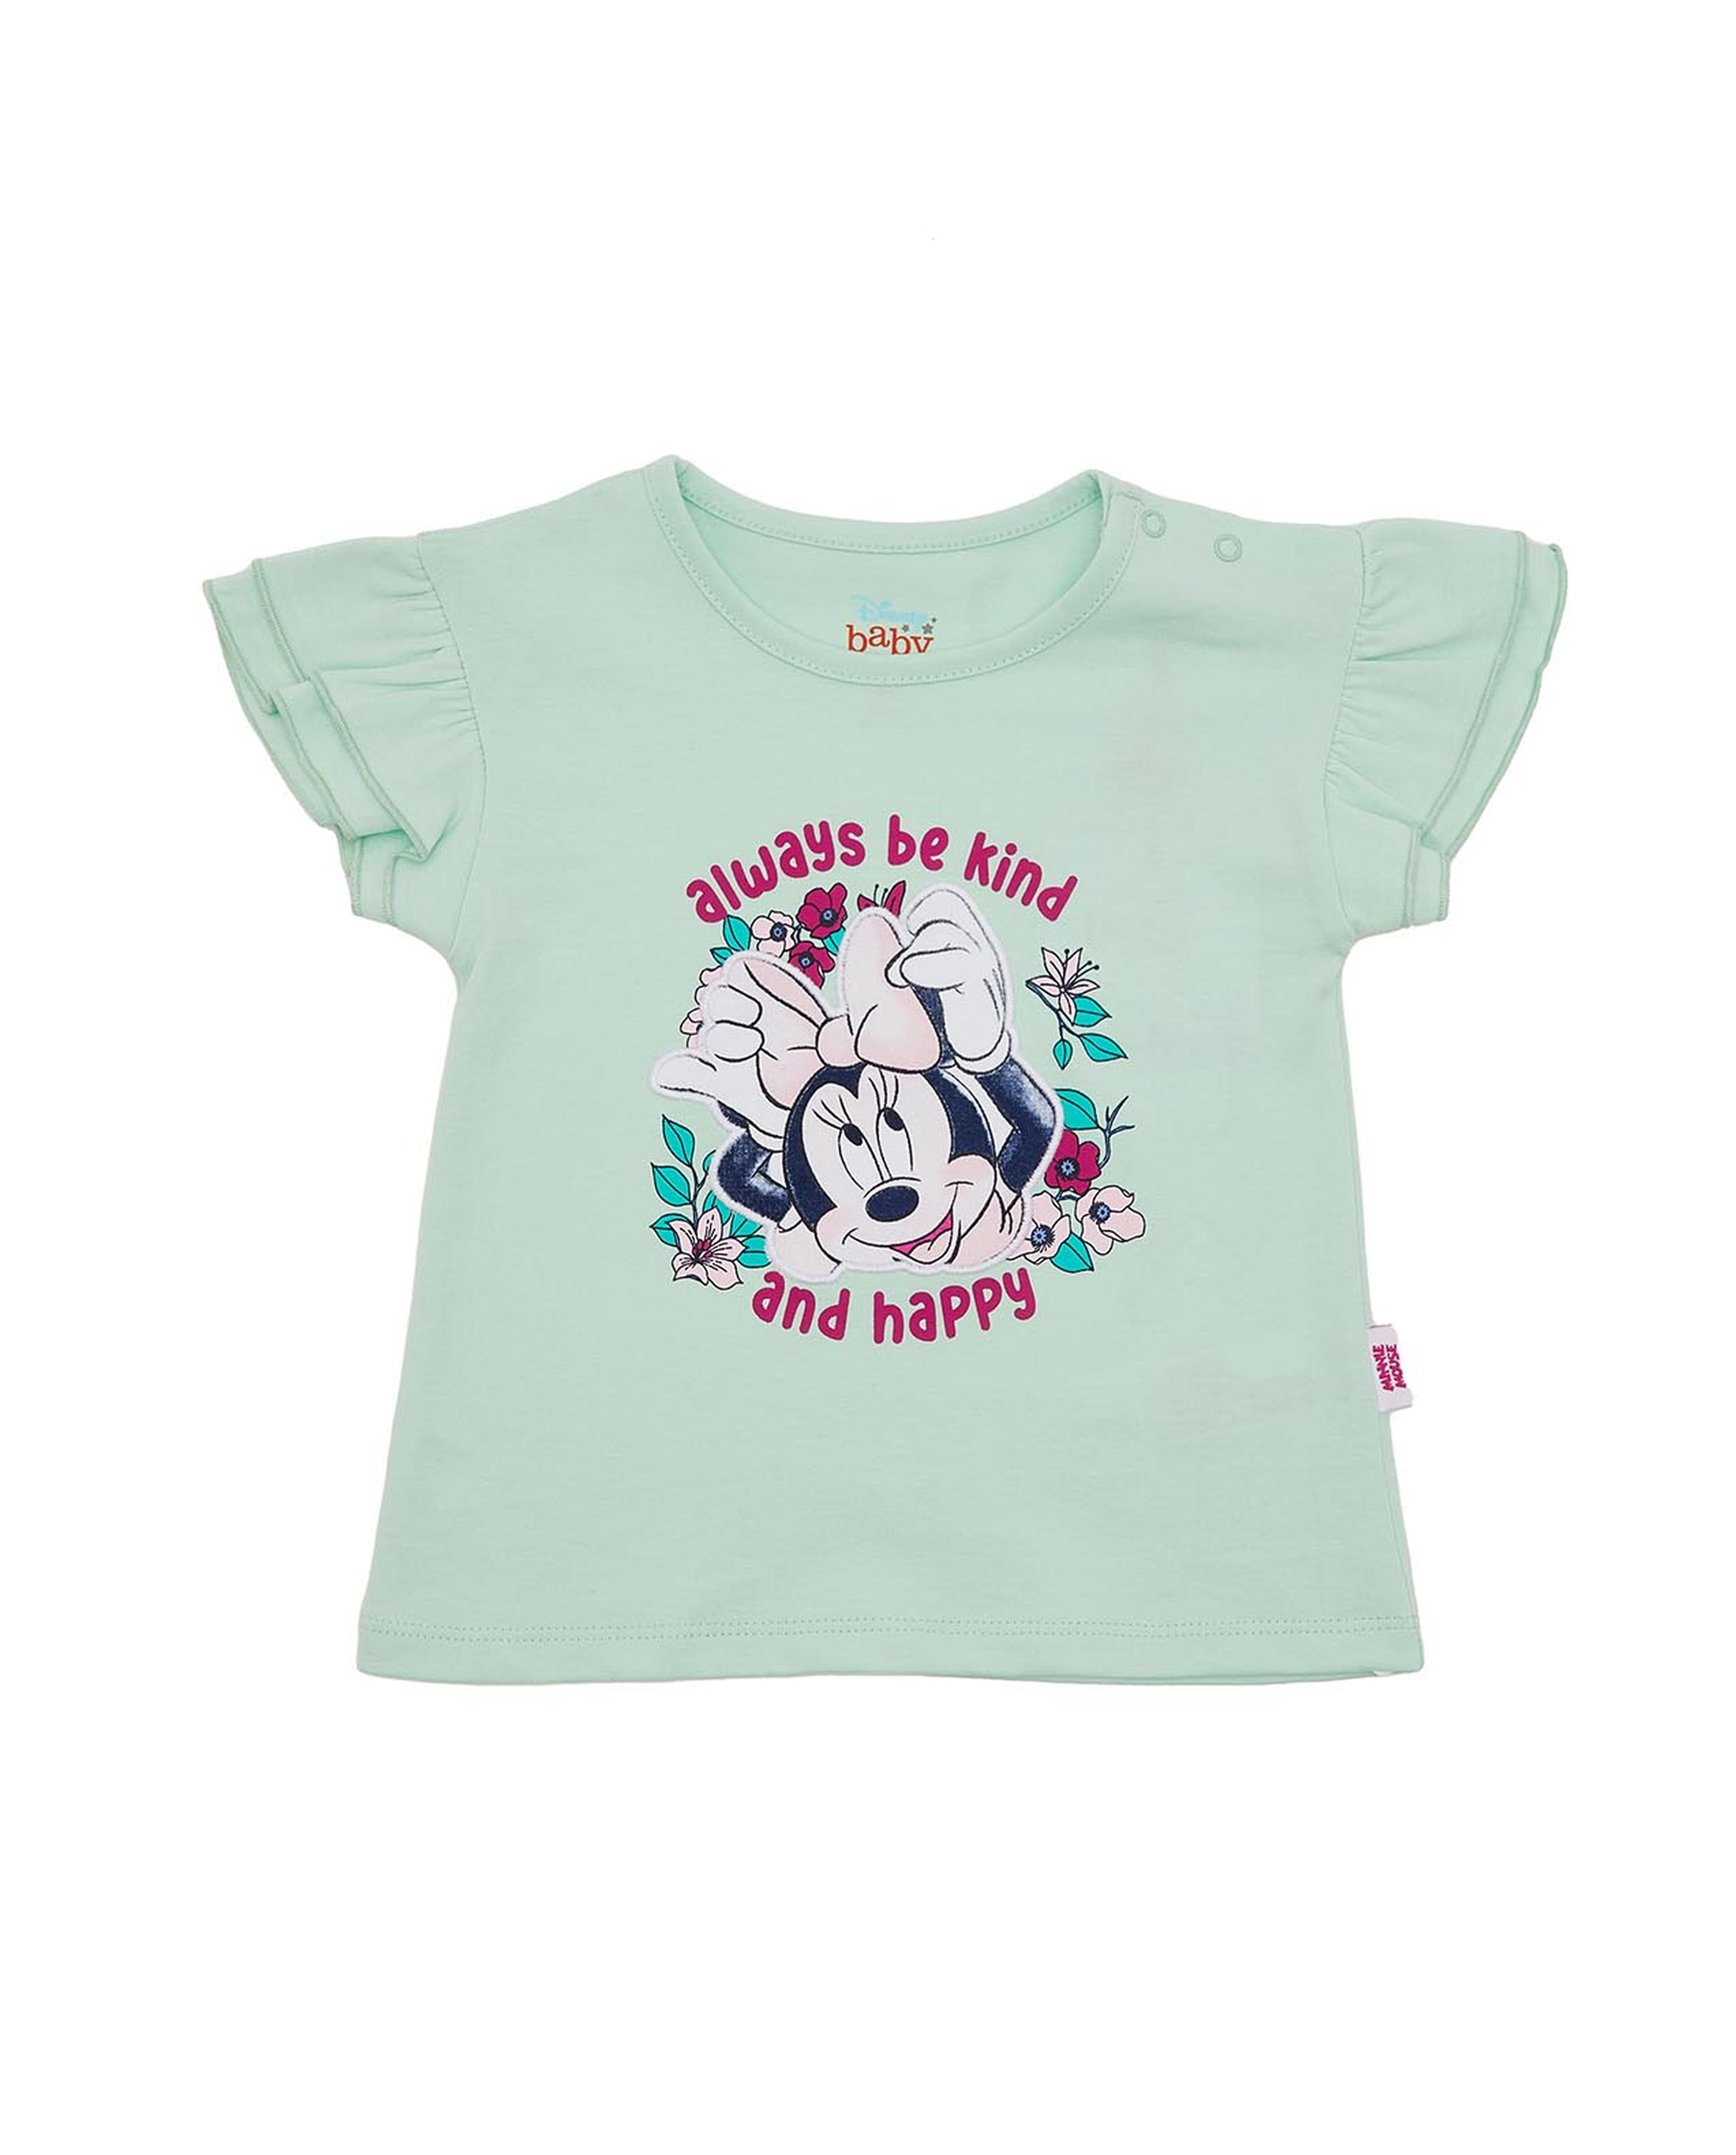 Minnie Mouse Print Top with Crew Neck and Flutter Sleeves